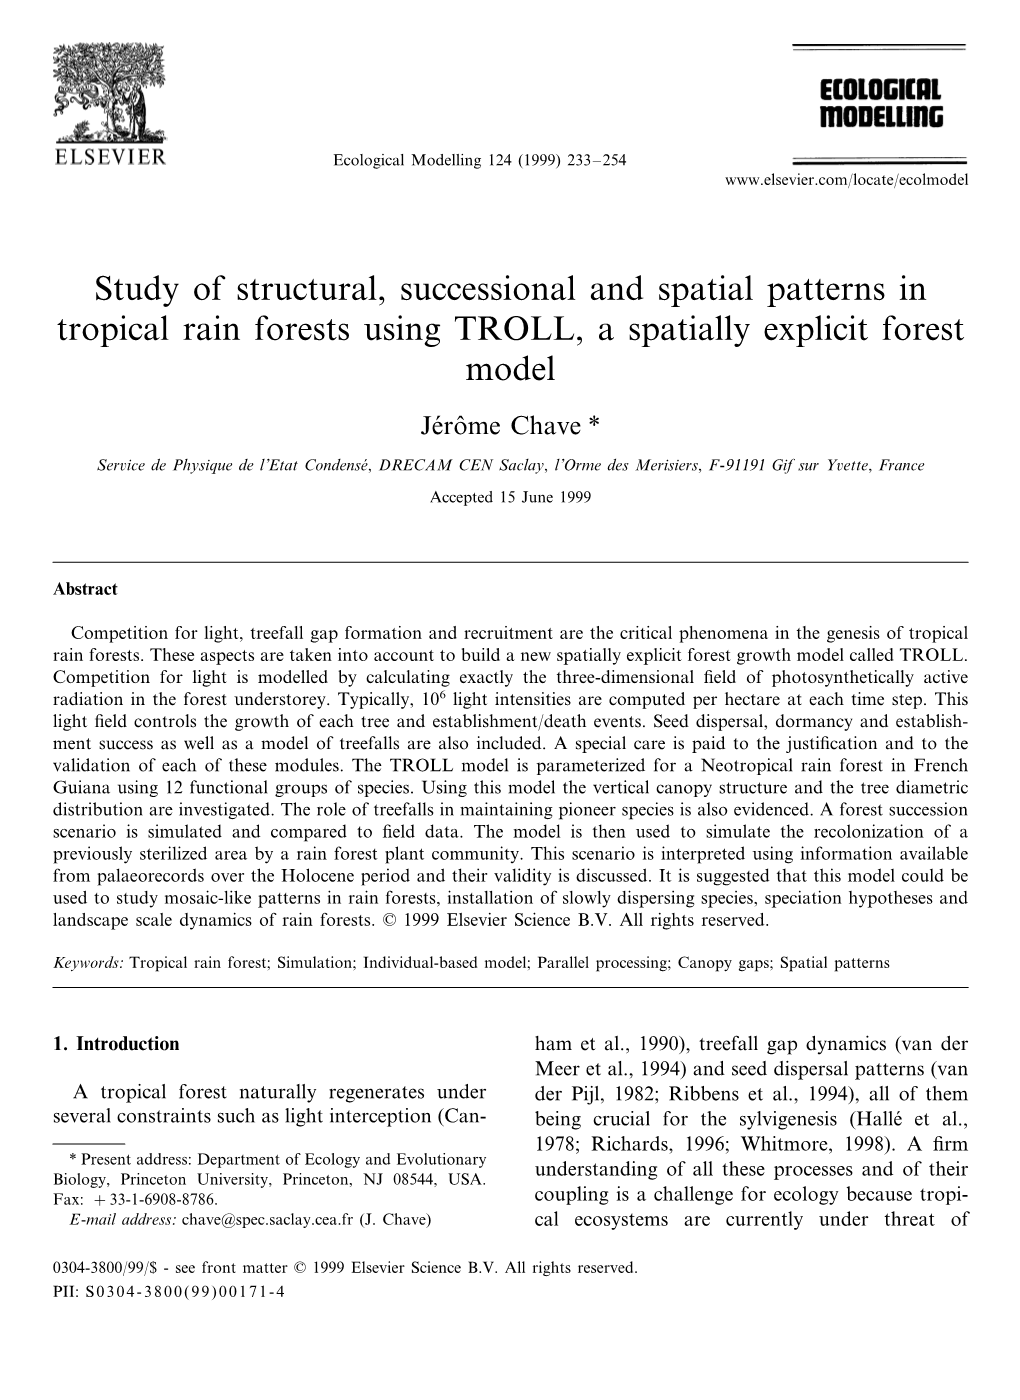 Study of Structural, Successional and Spatial Patterns in Tropical Rain Forests Using TROLL, a Spatially Explicit Forest Model